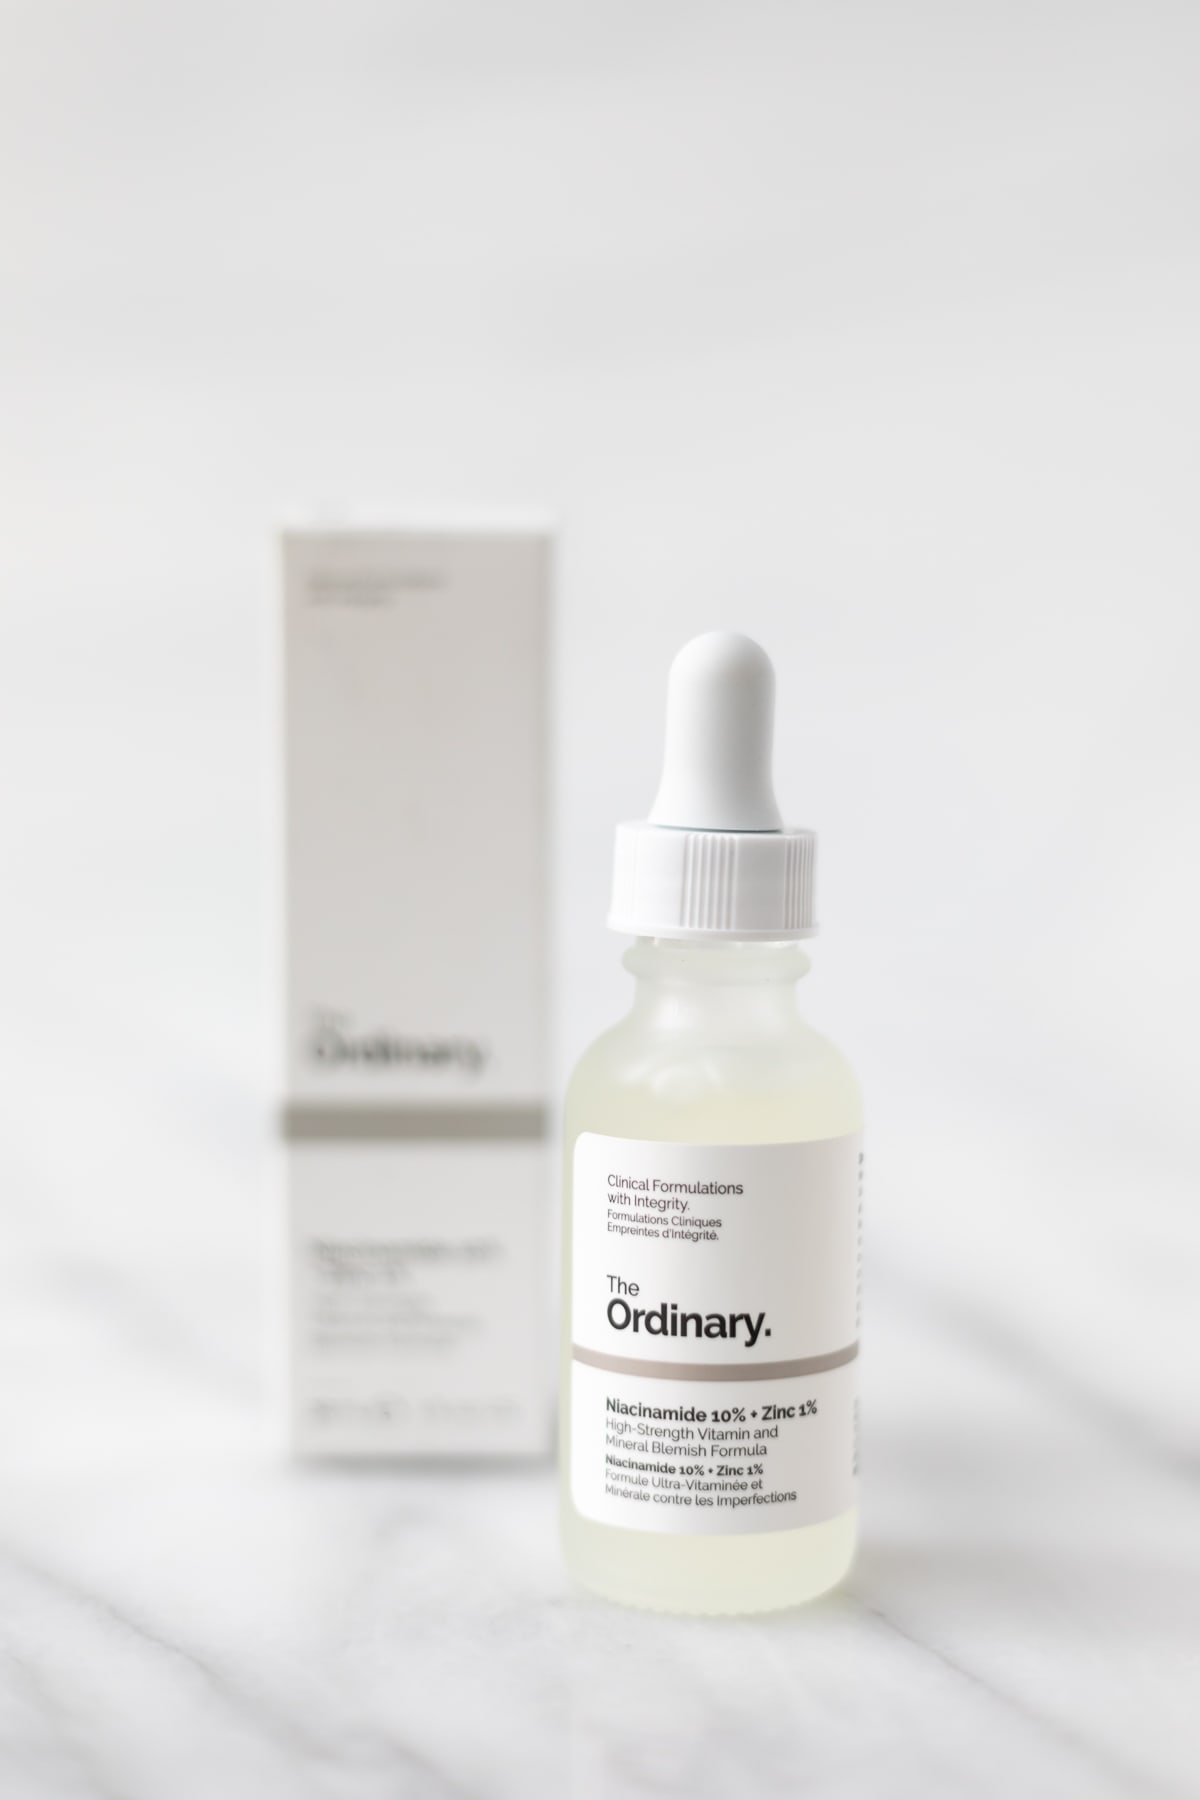 The Ordinary Niacinamide bottle and box on a marble table.